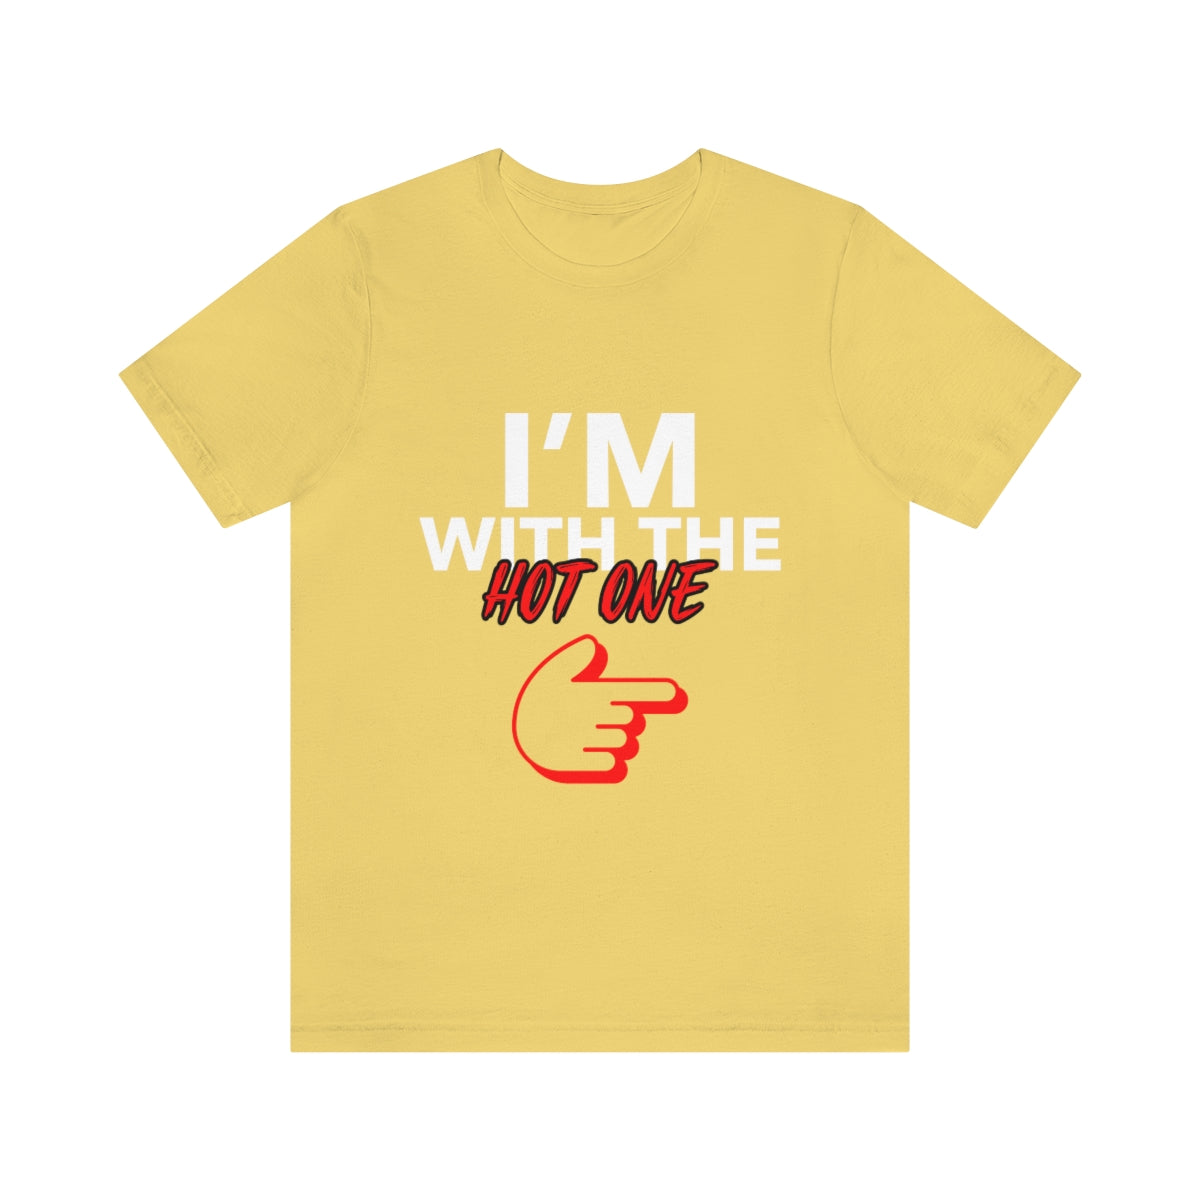 I'm With The Hot One - Unisex T-Shirt